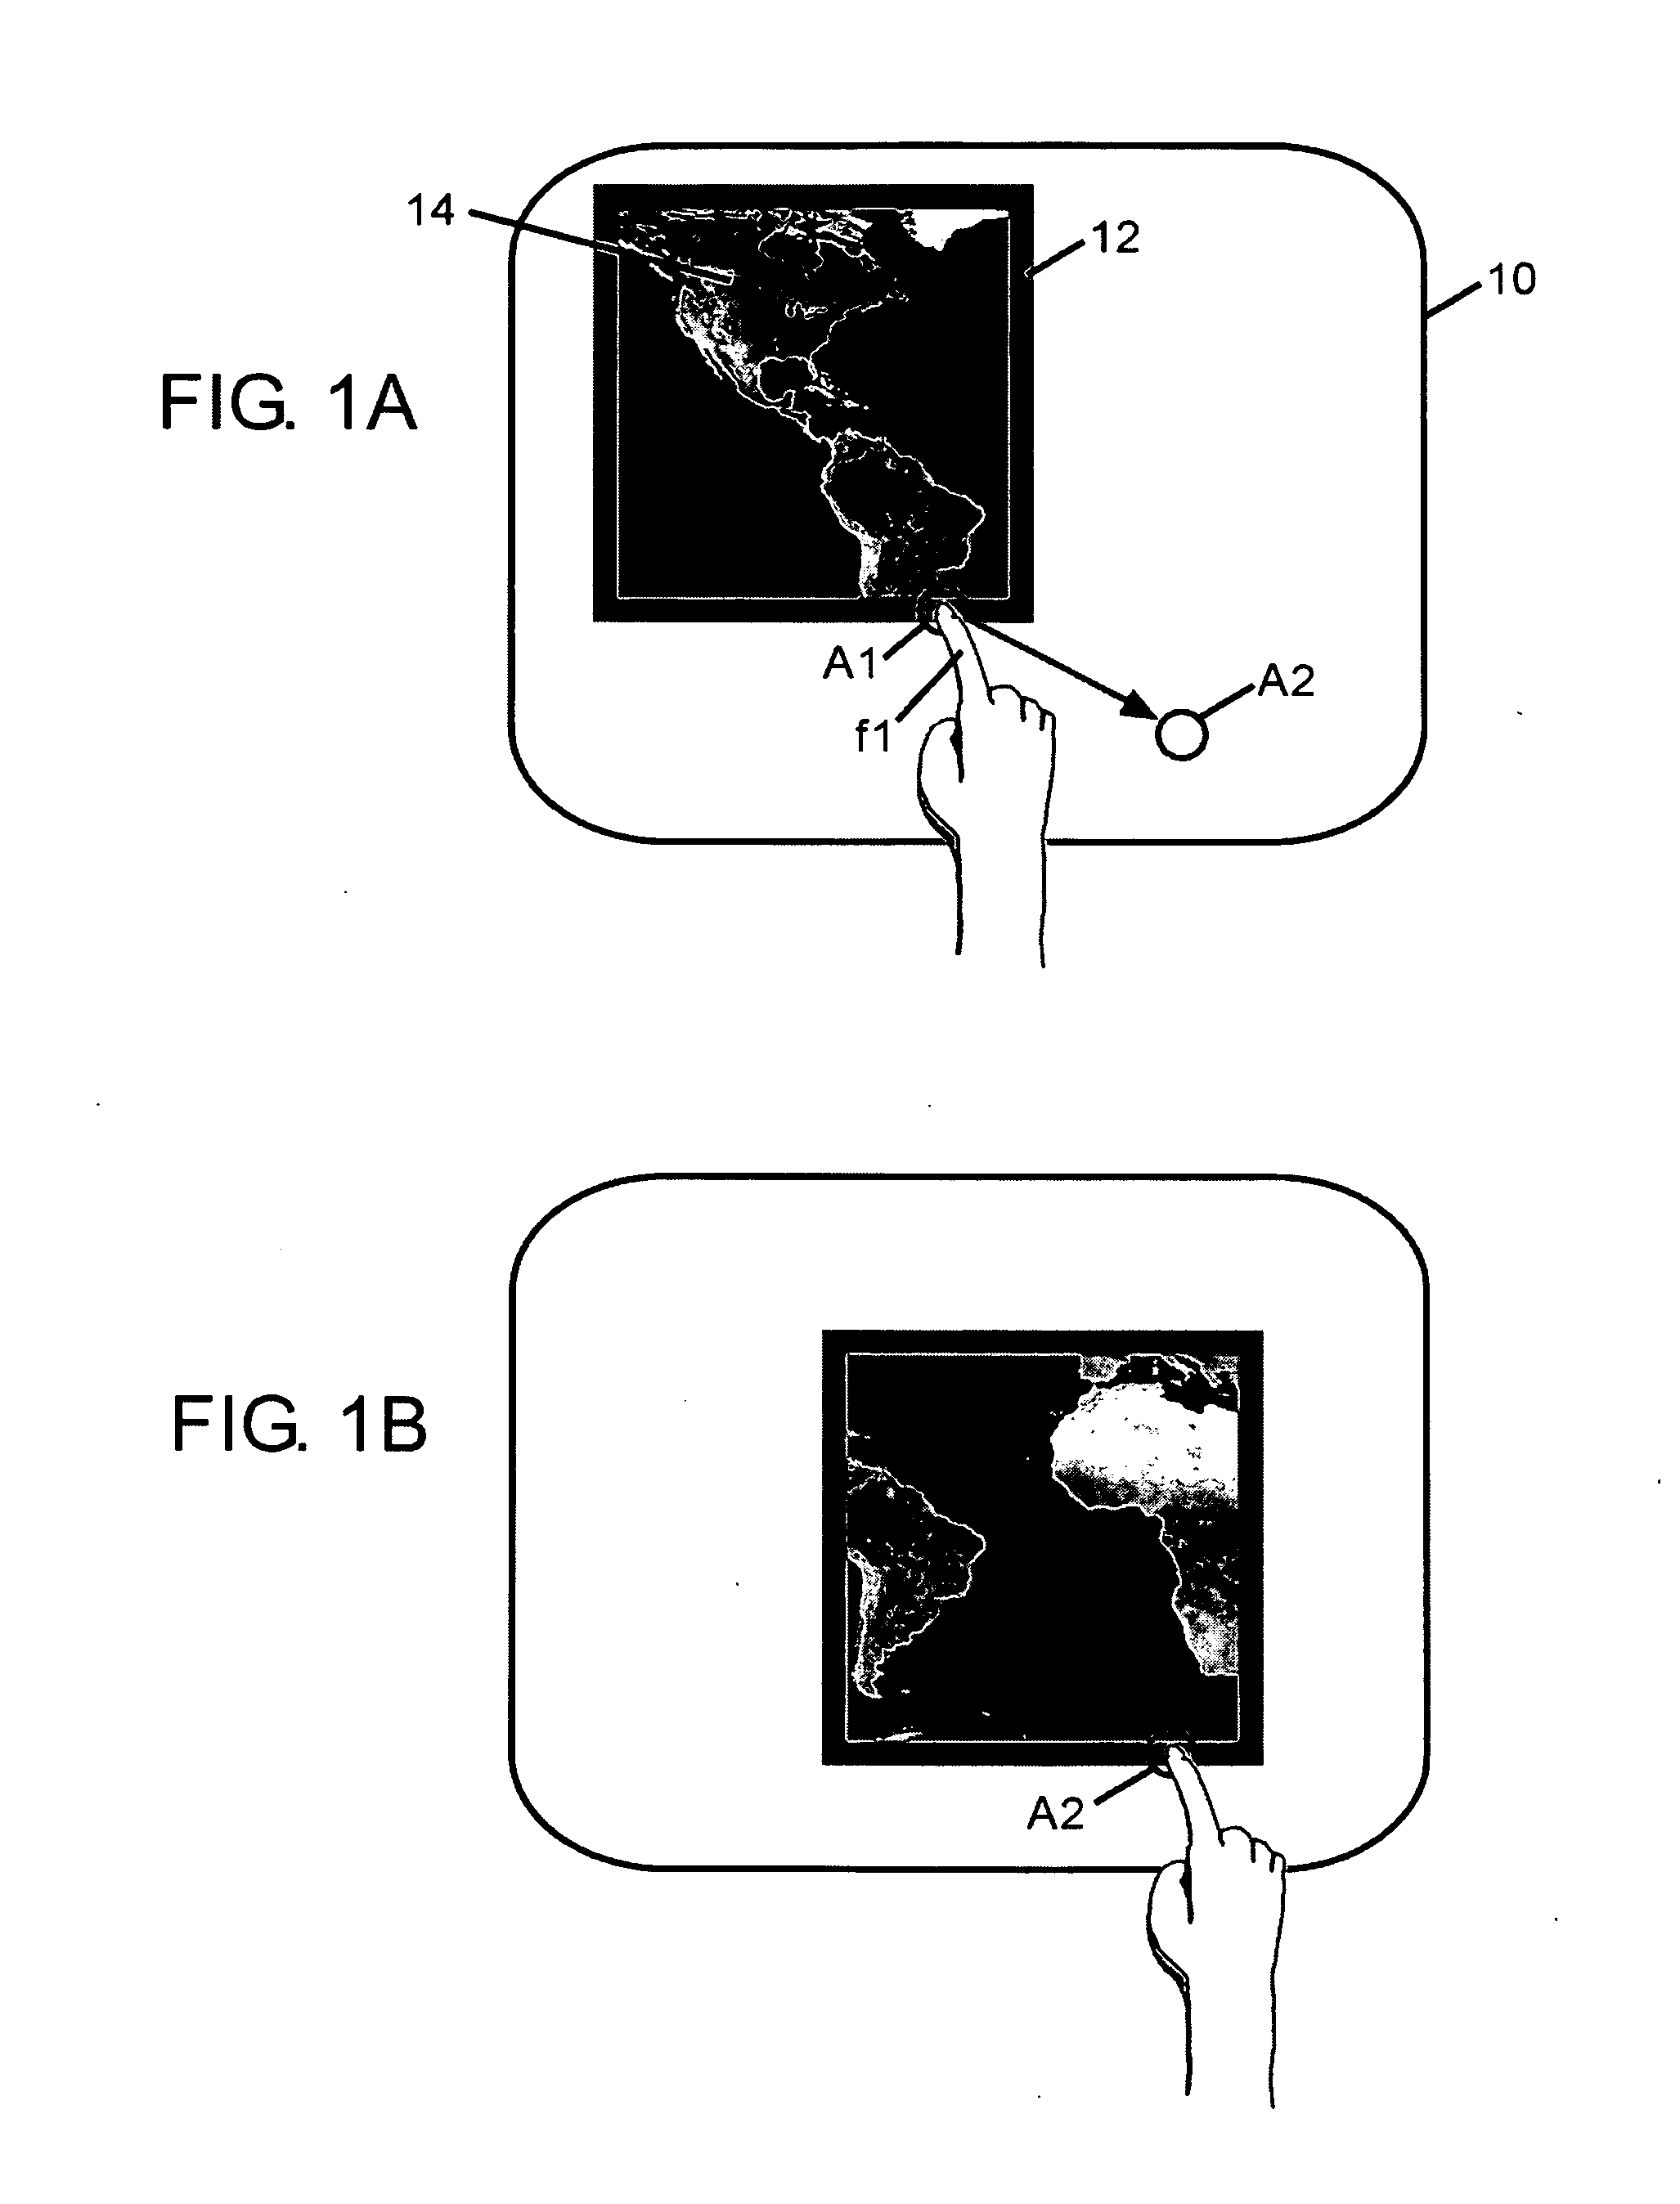 Methods of interfacing with multi-input devices and multi-input display systems employing interfacing techniques